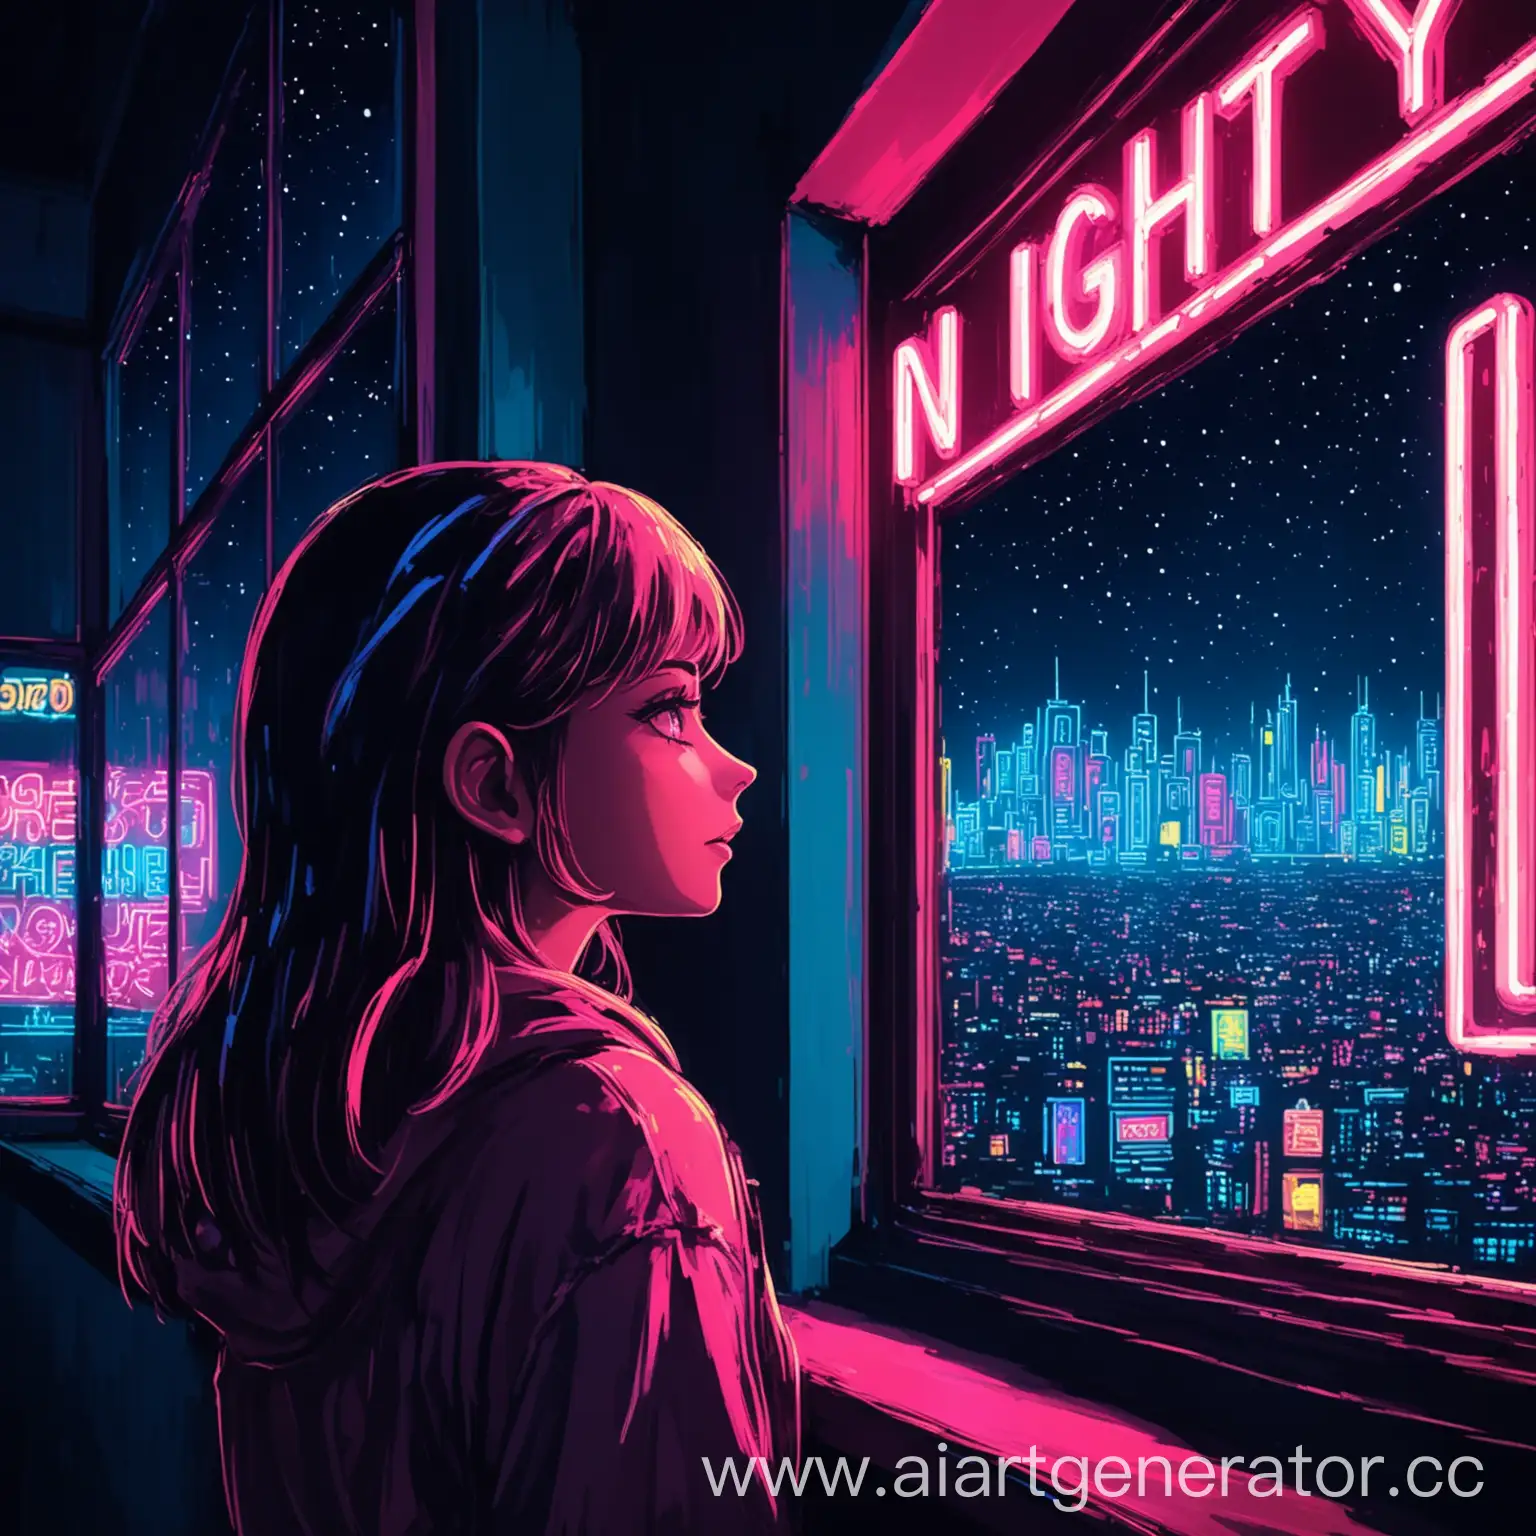 Curious-Girl-Gazes-at-Neon-Cityscape-Through-Window-at-Night